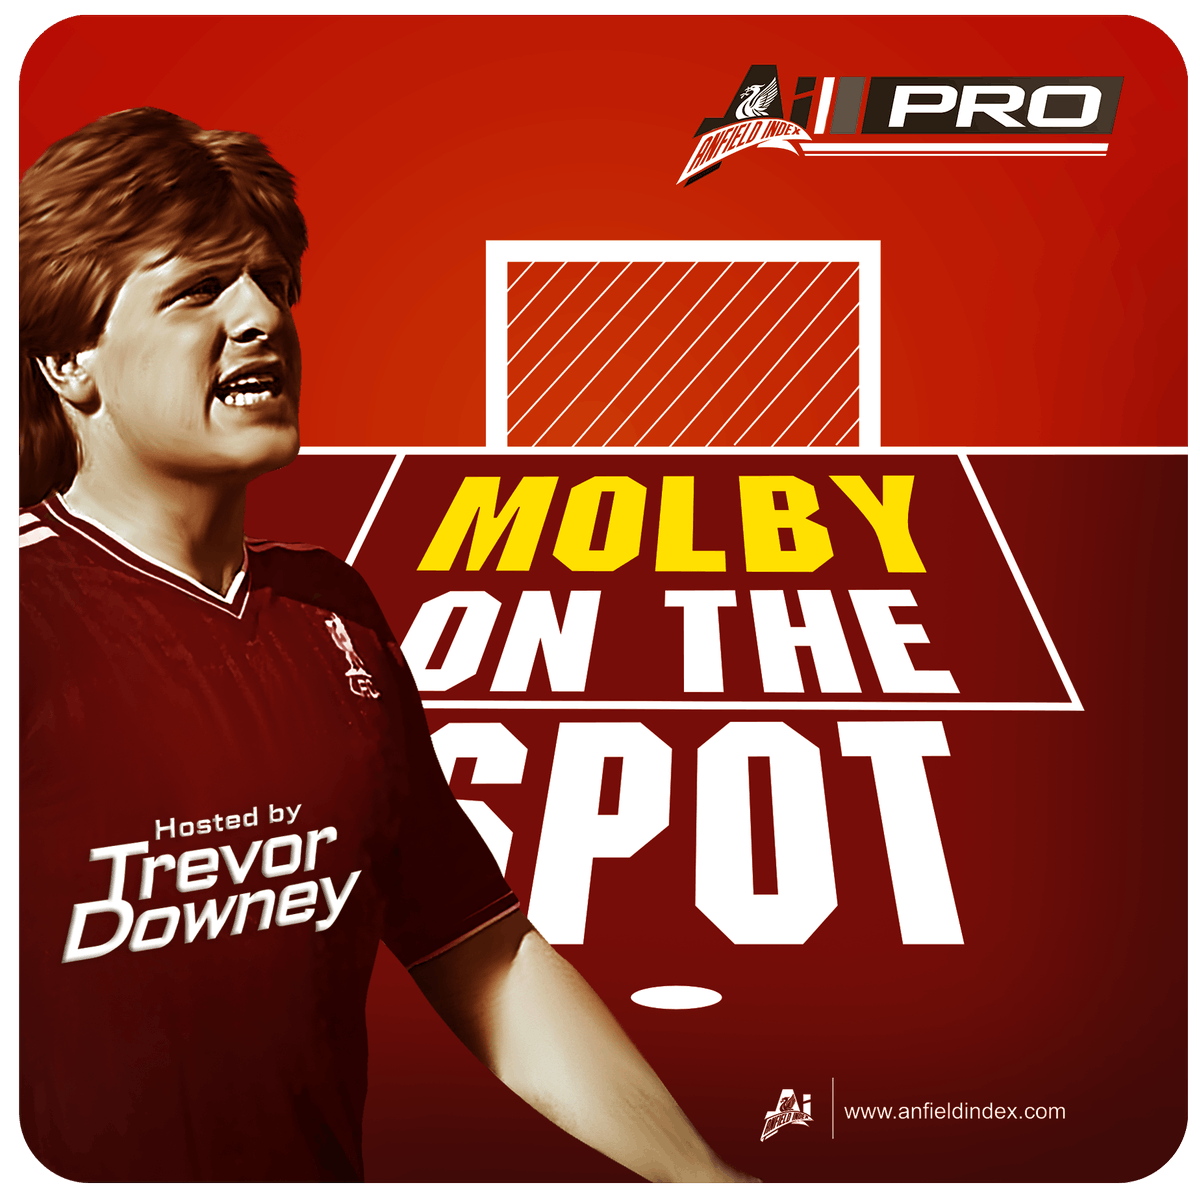 Molby On The Spot - NEW ERA INCOMING